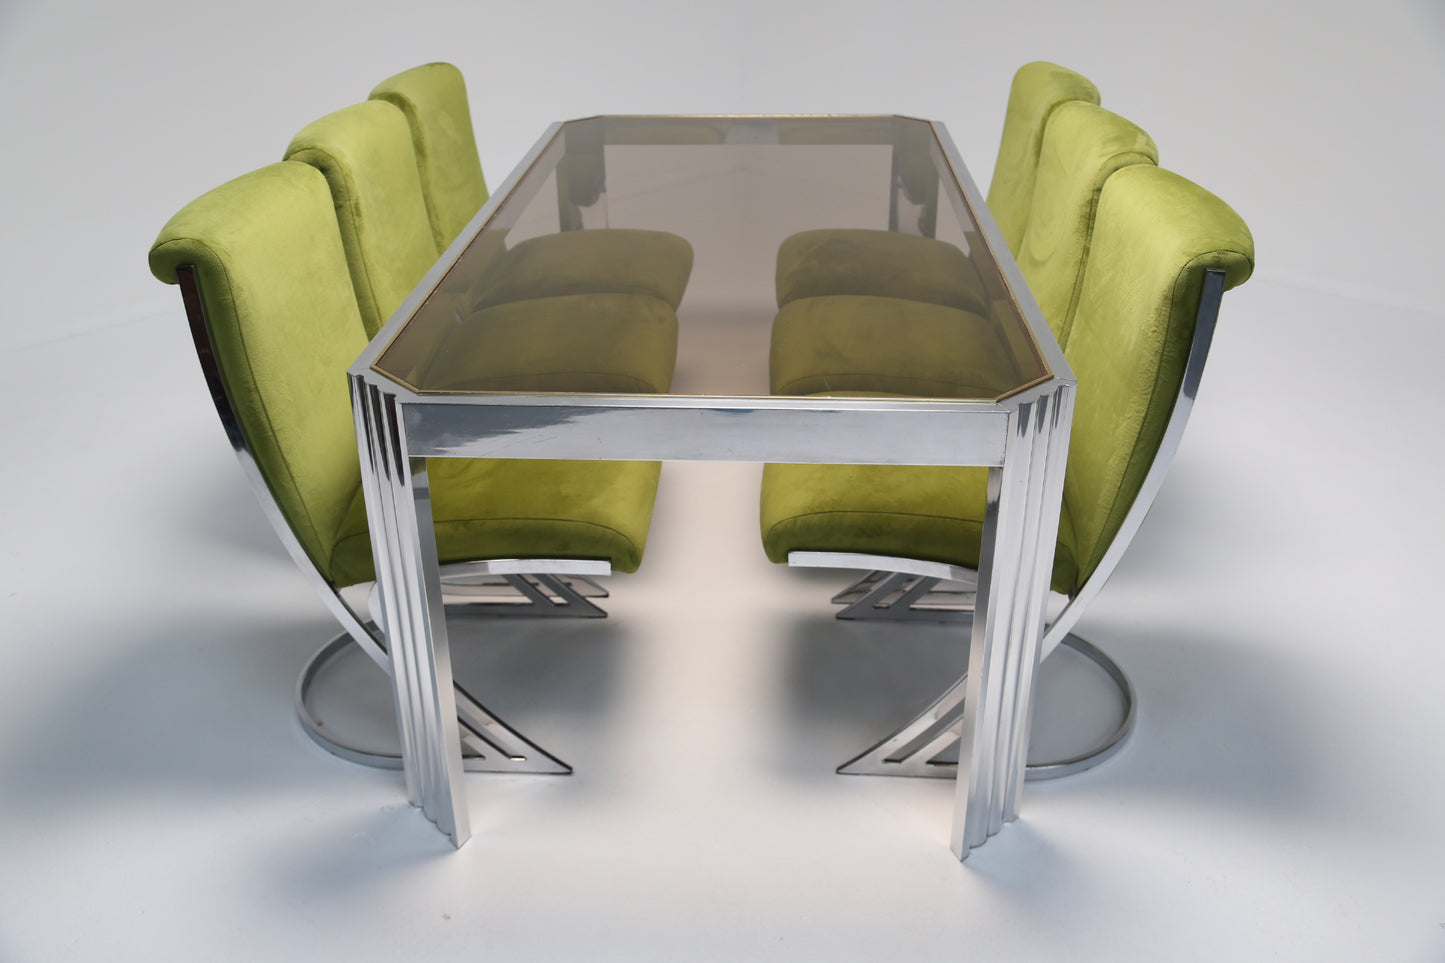 Aluminium dining table with glass top.